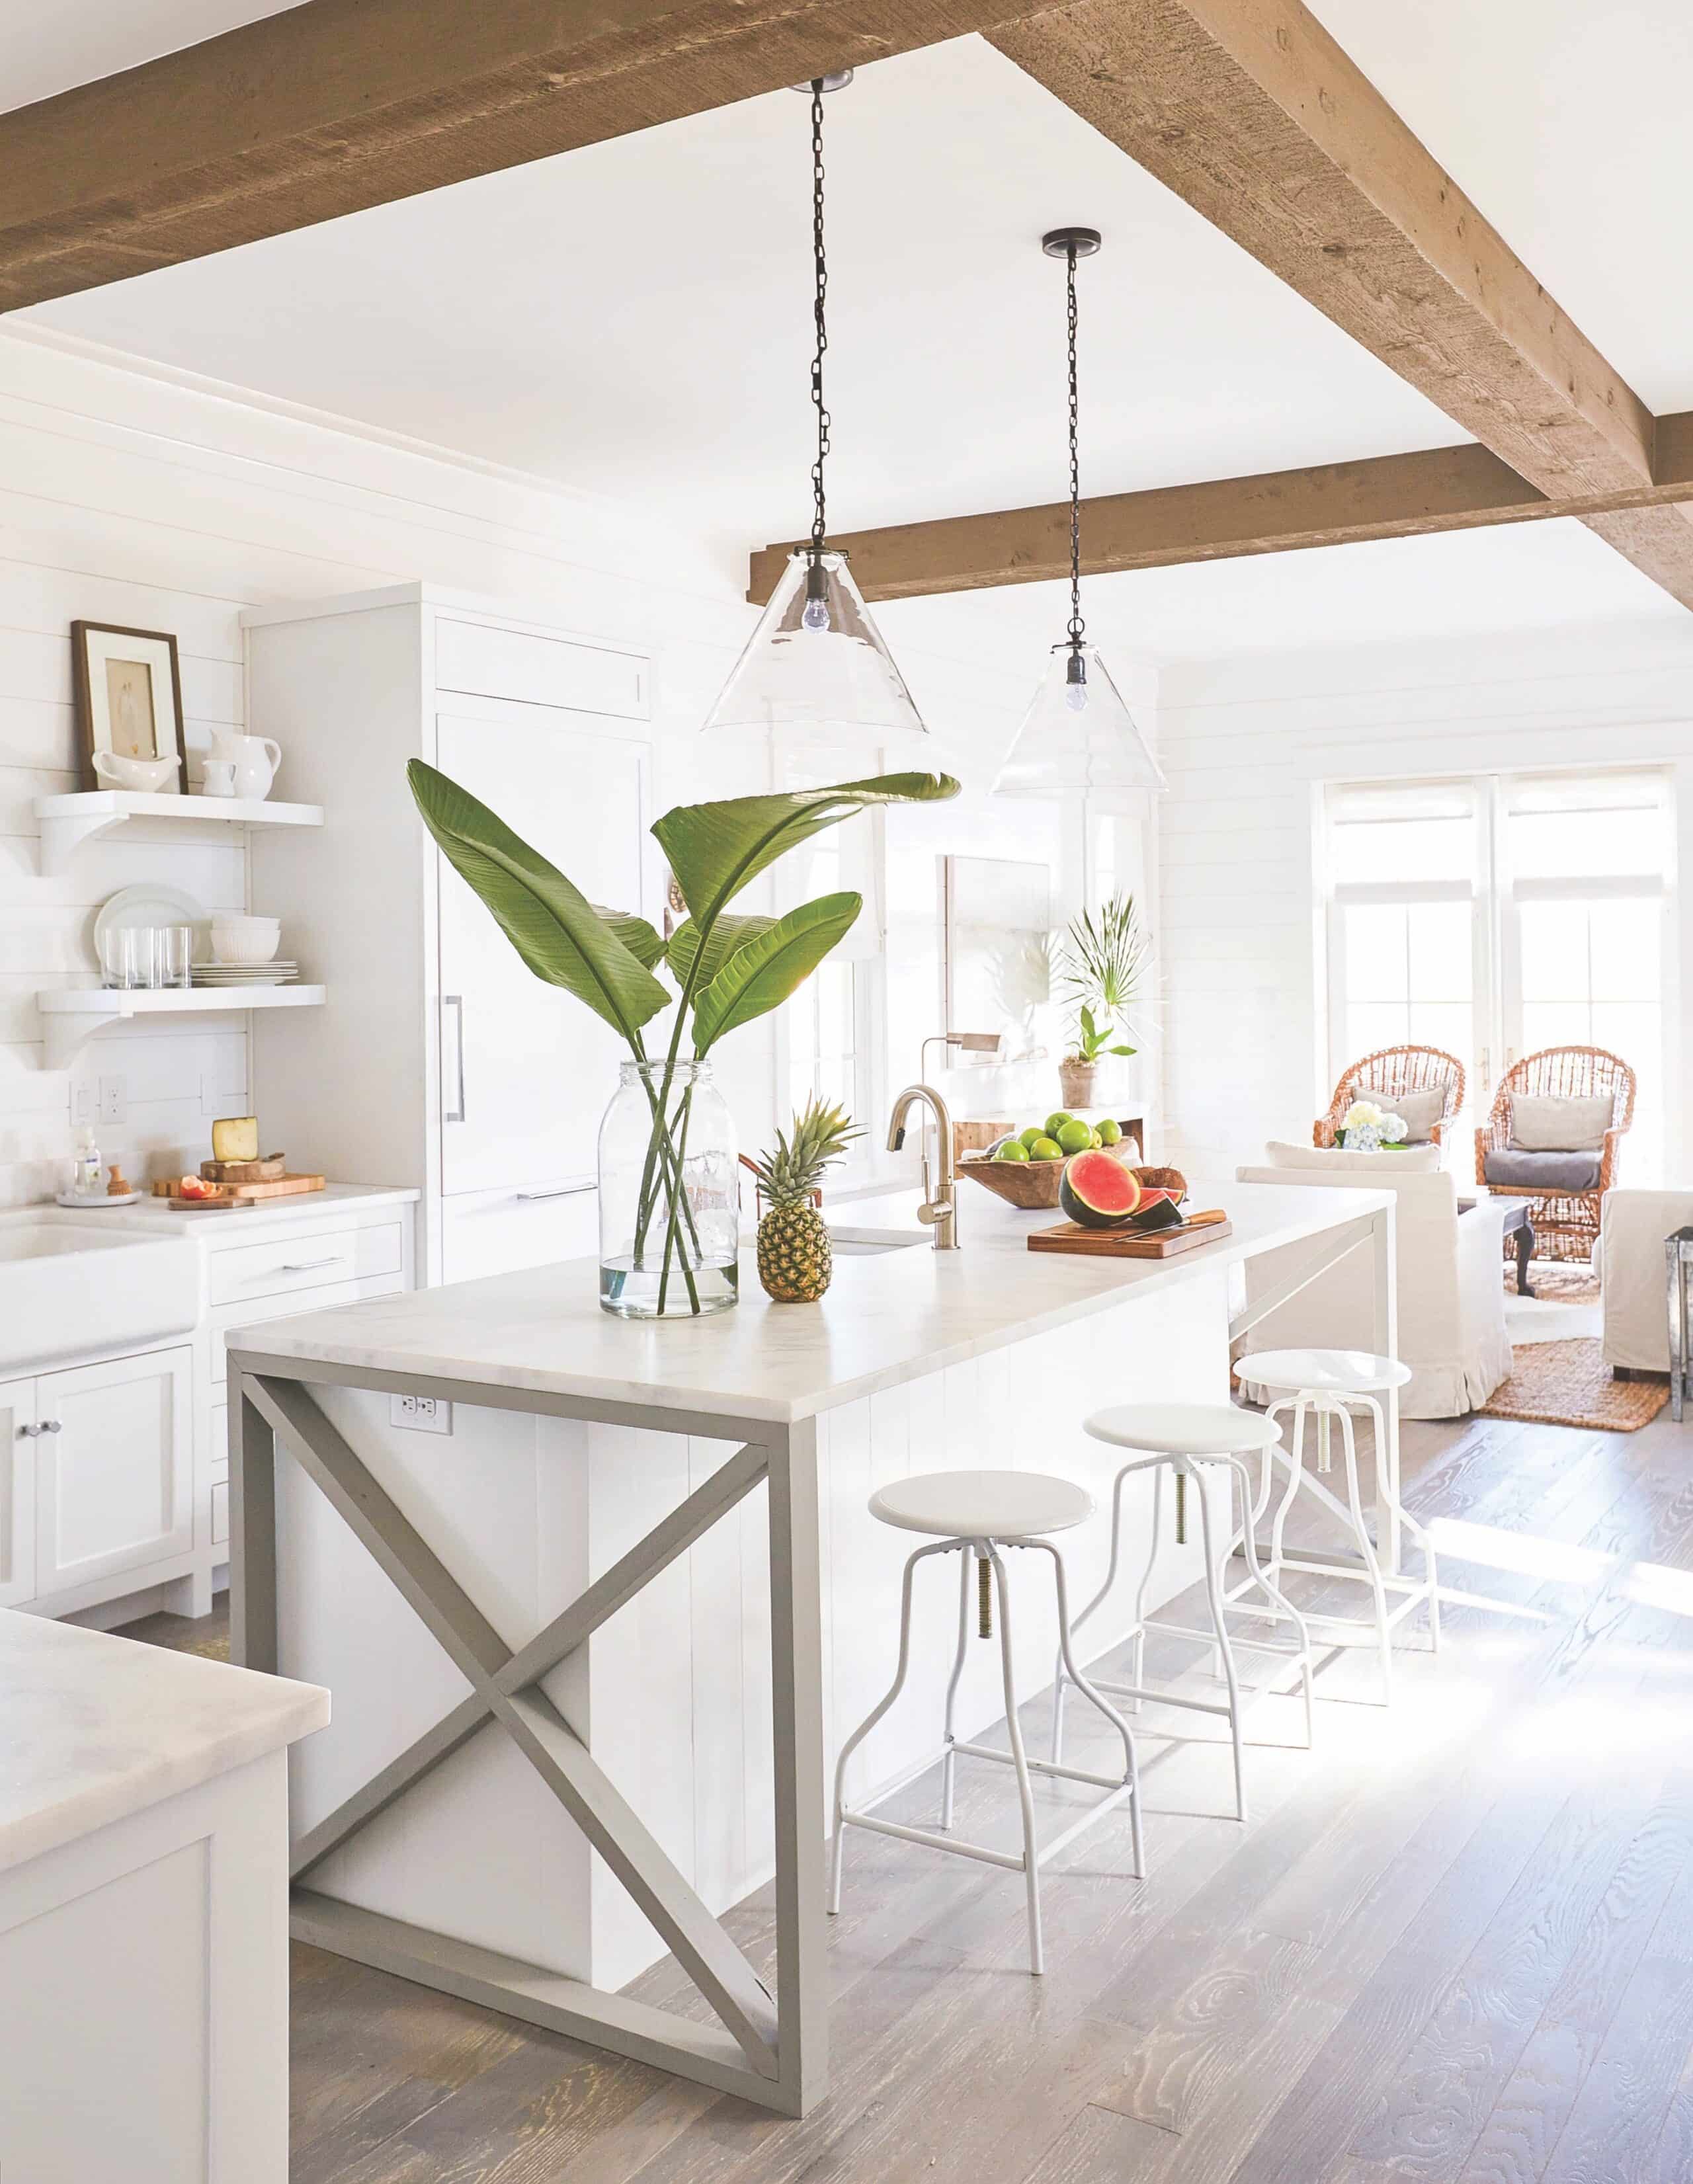 An airy kitchen in Grayton Beach, Florida, designed by Holly Shipman